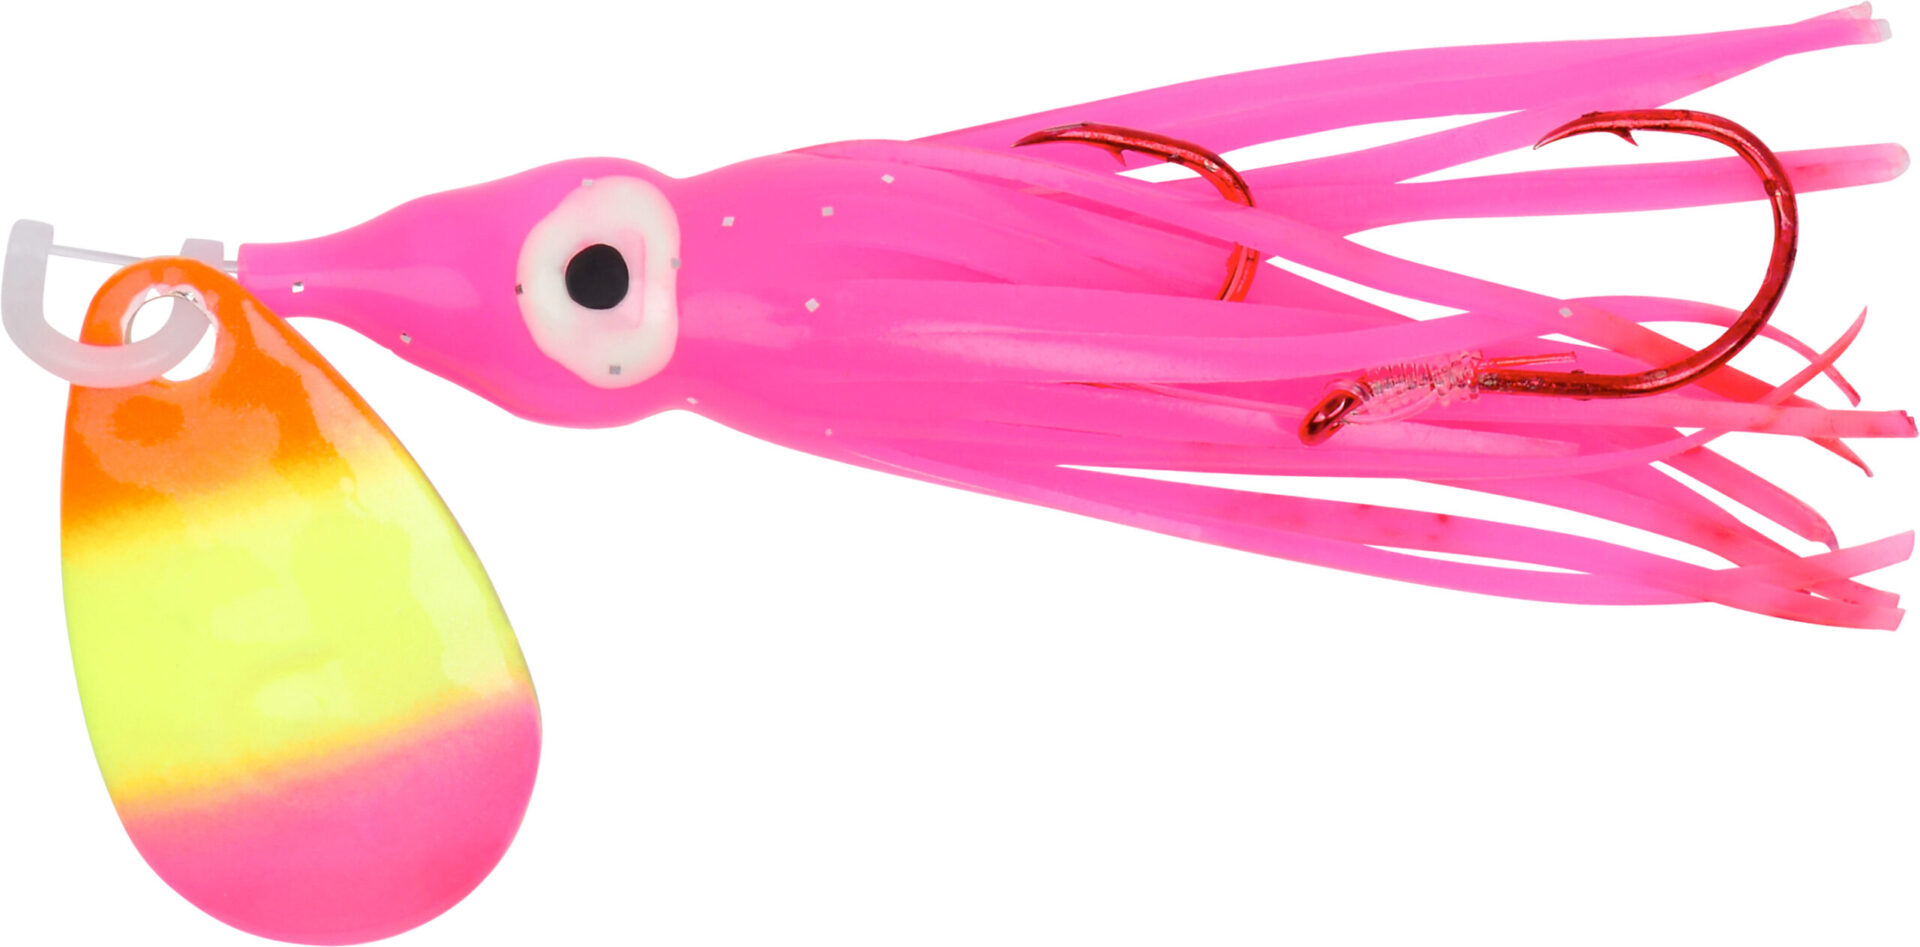 https://www.yakimabait.com/wp-content/uploads/2015/12/products-TIGHT-LINE-KOKANEE-RIG-SUN-scaled.jpg